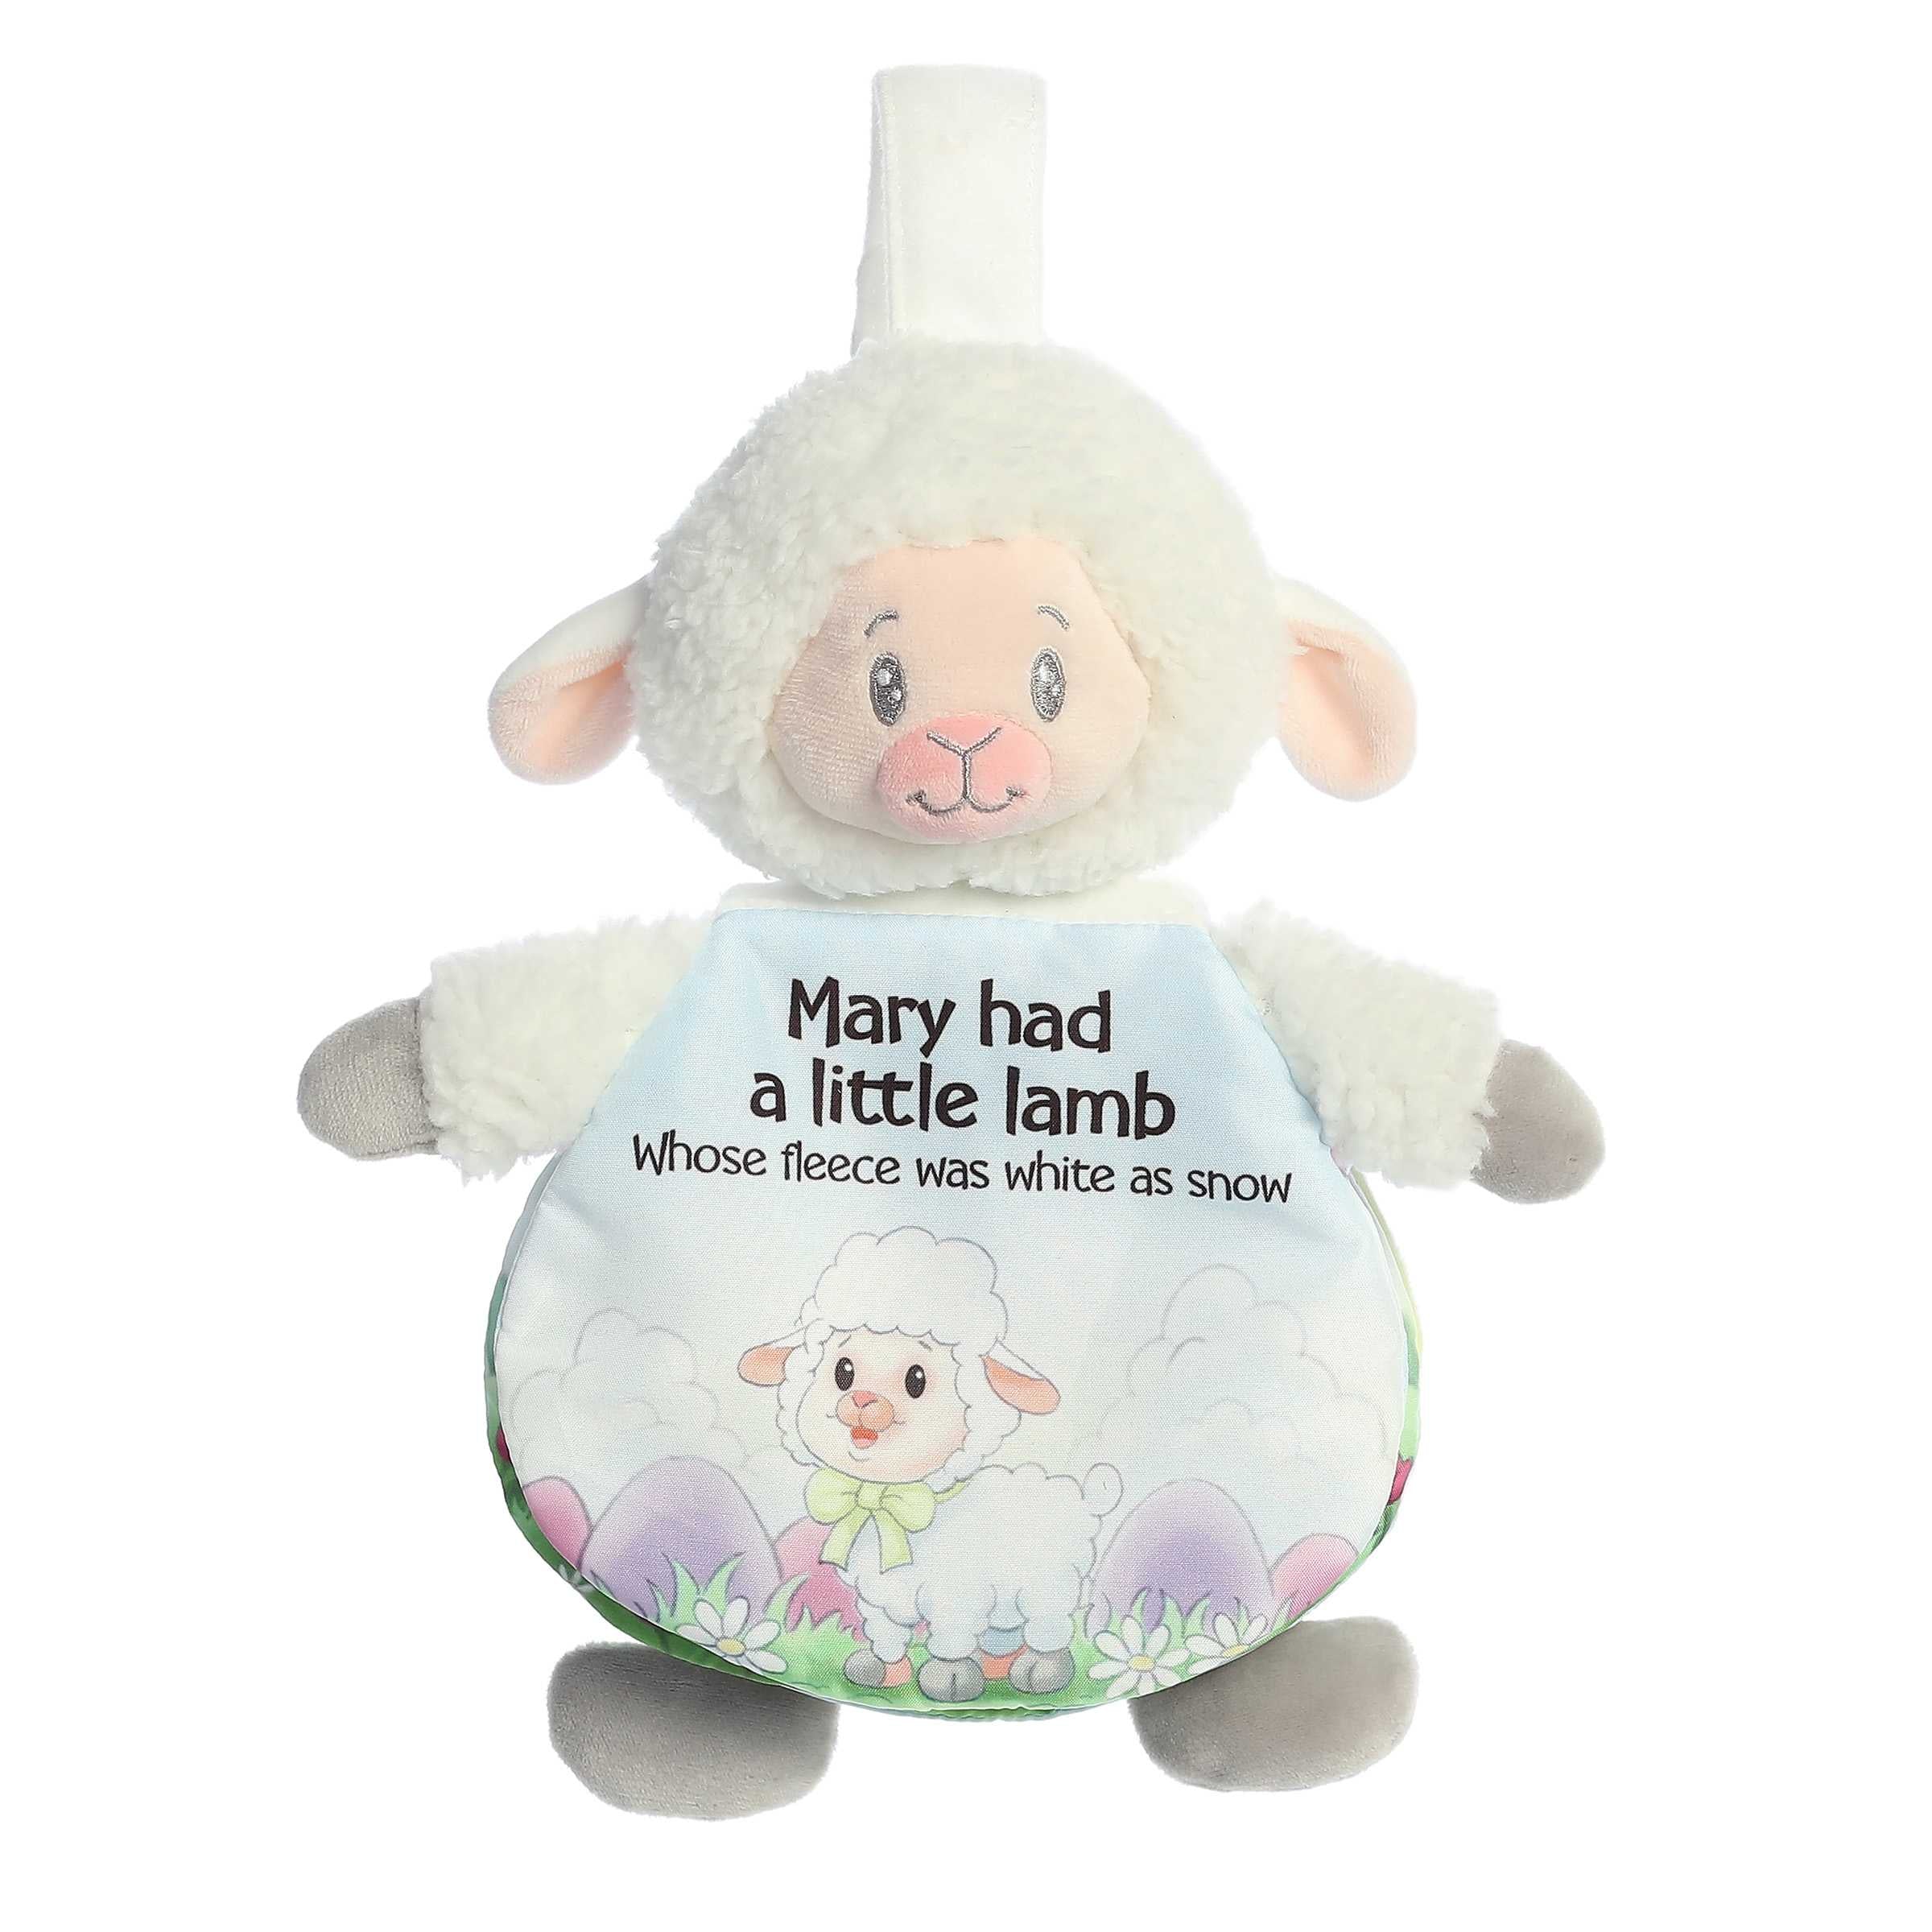 Adorable Mary Had A Little Lamb story book with crinkly pages and pictures, with attached plush white and pink lamb toy